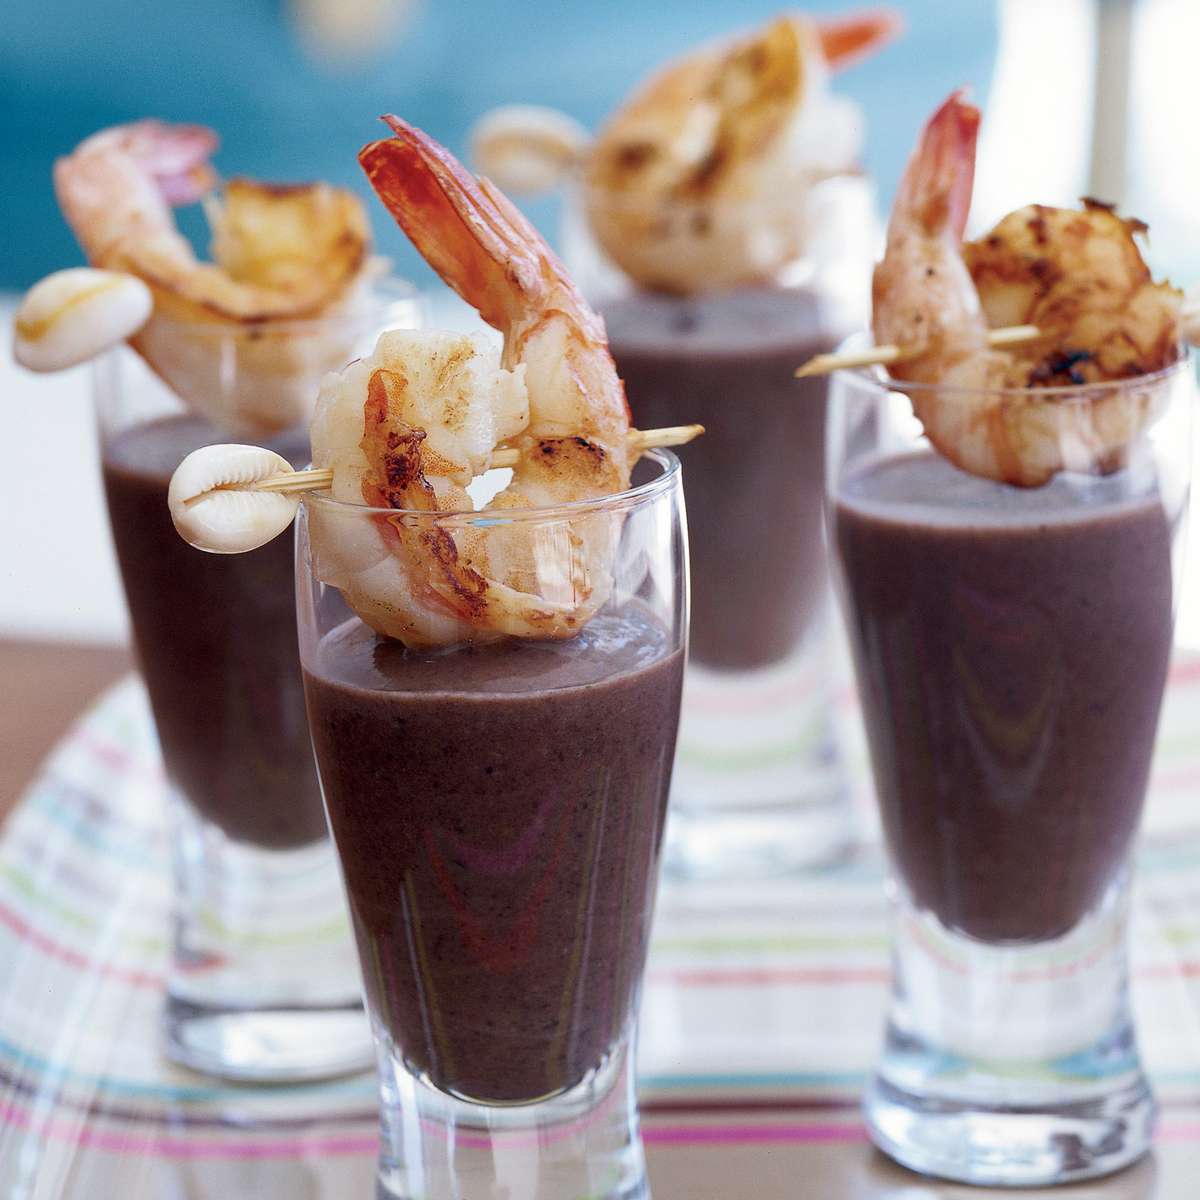 Sherried Black Bean Soup Topped with Grilled Shrimp